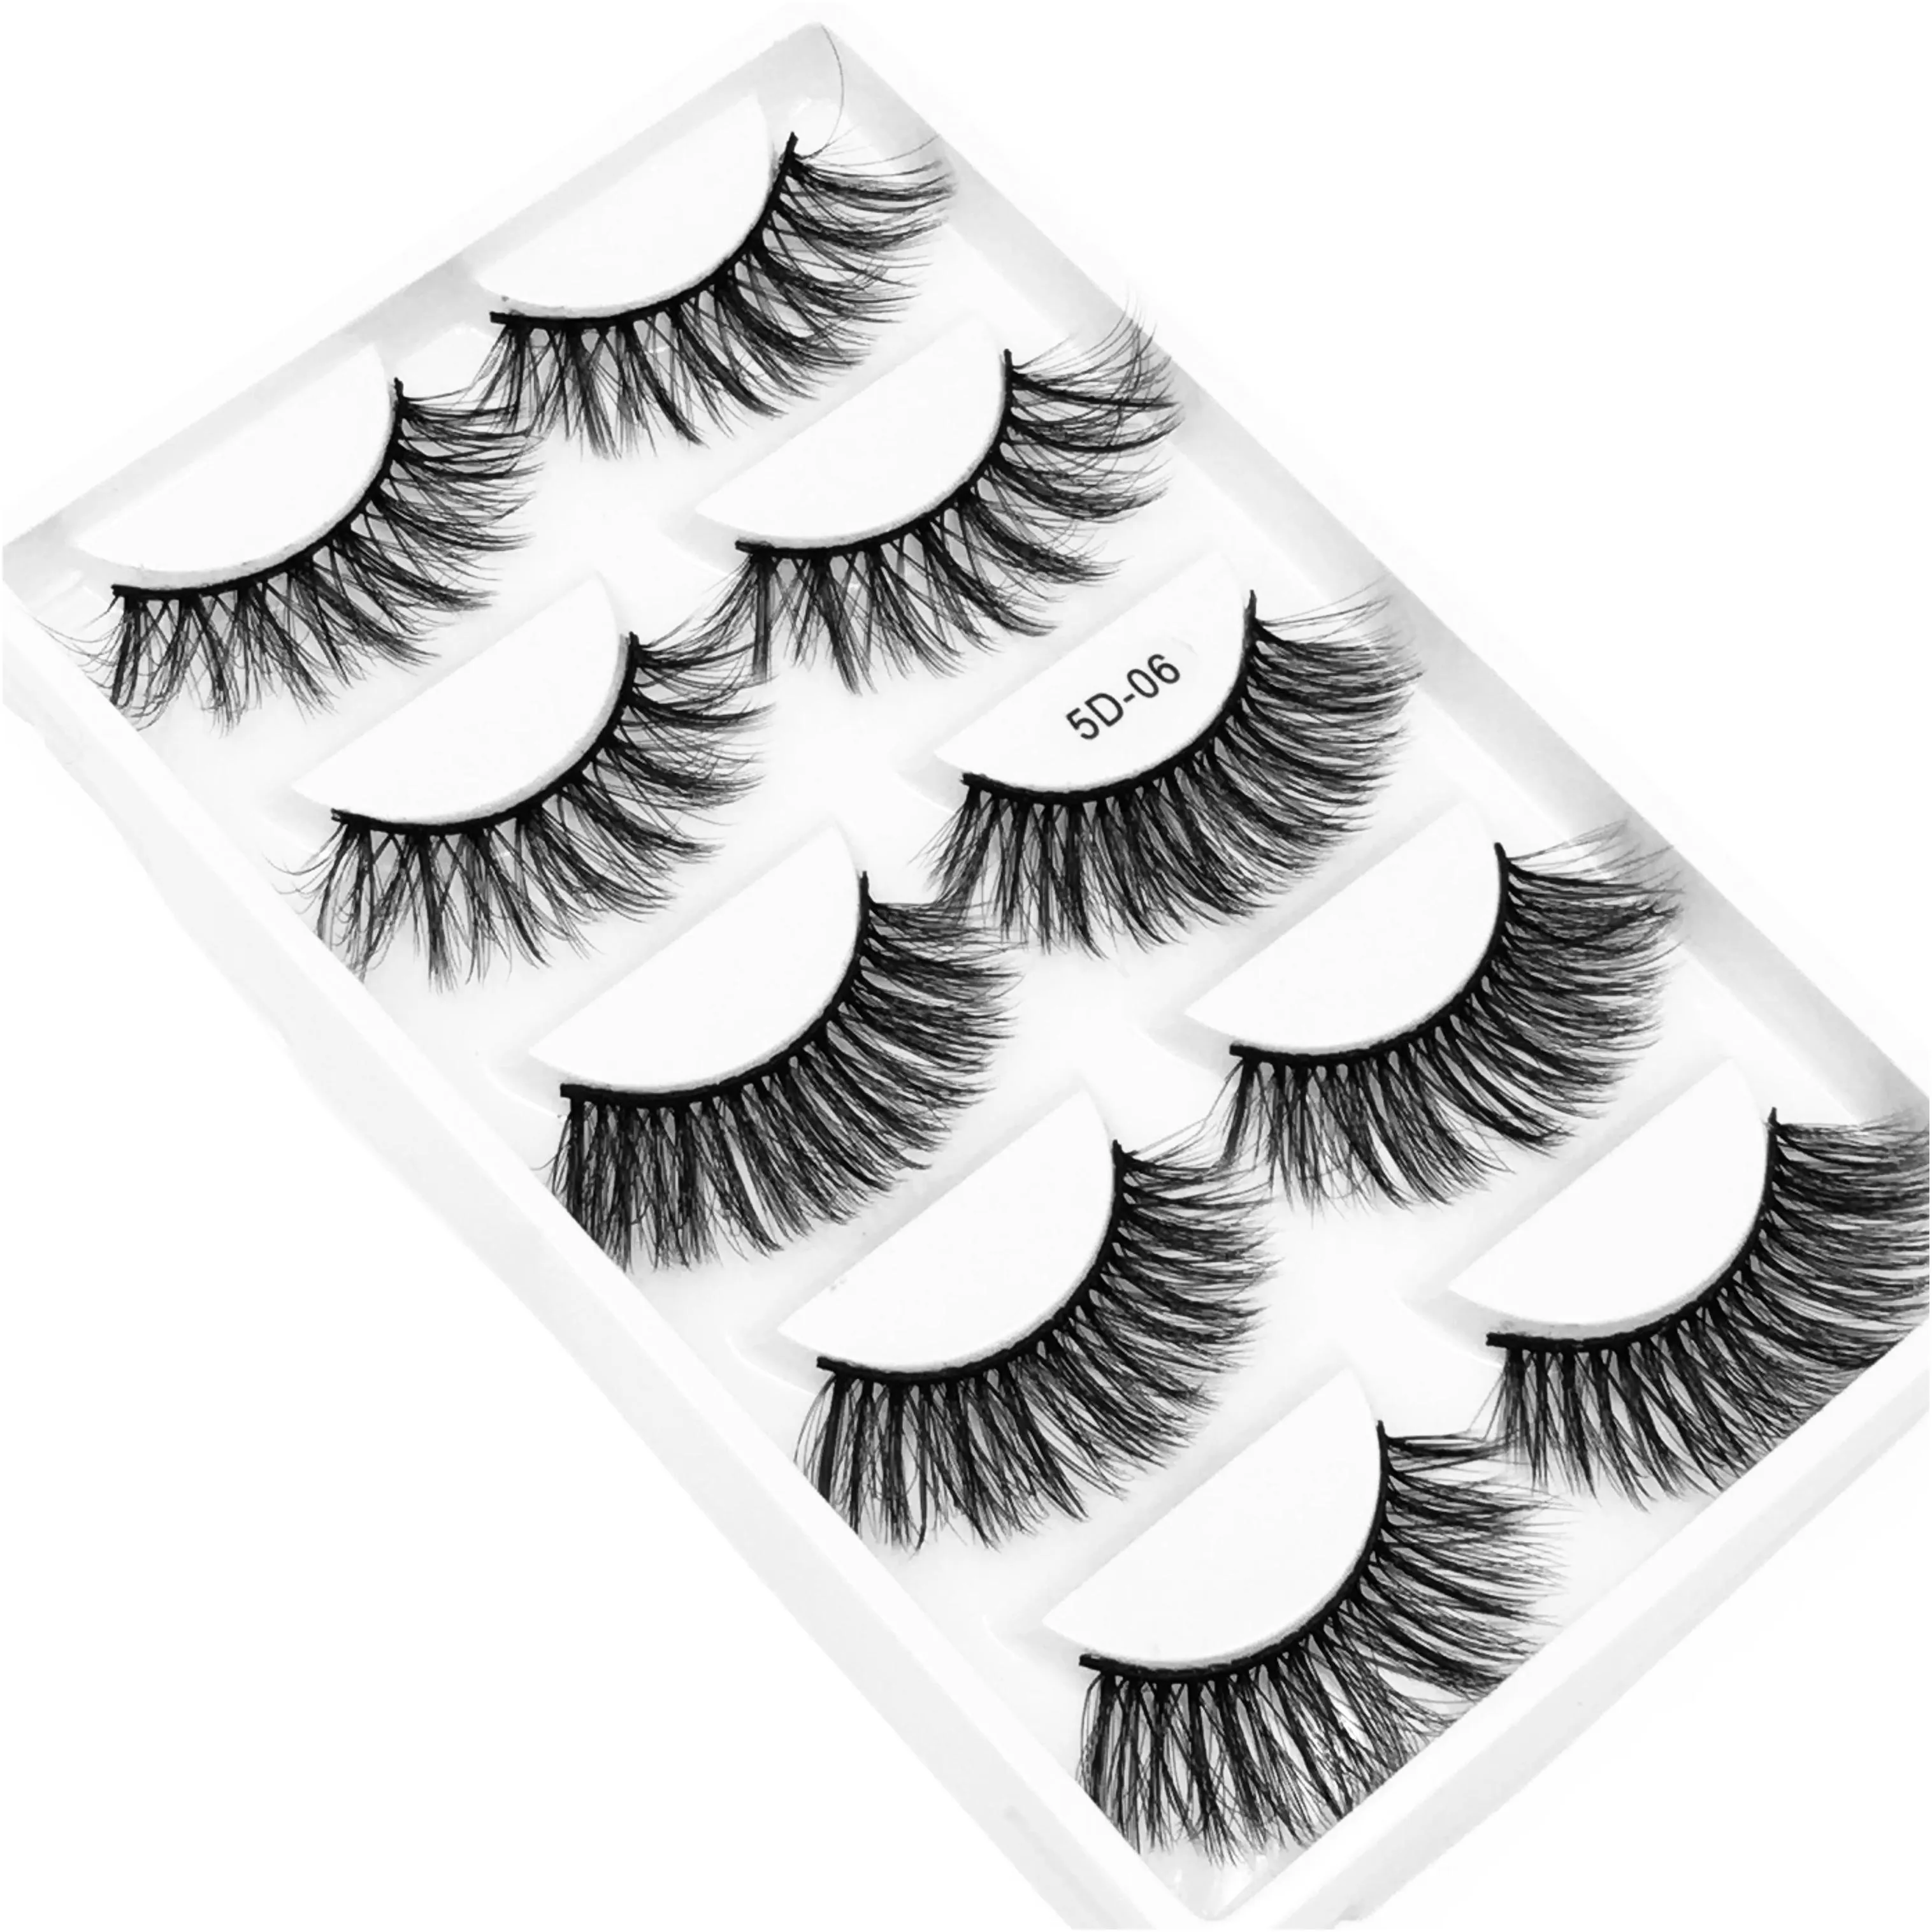 5 pairs 3d faux mink hair soft false eyelashes fluffy wispy thick lashes handmade soft eye makeup extension tools